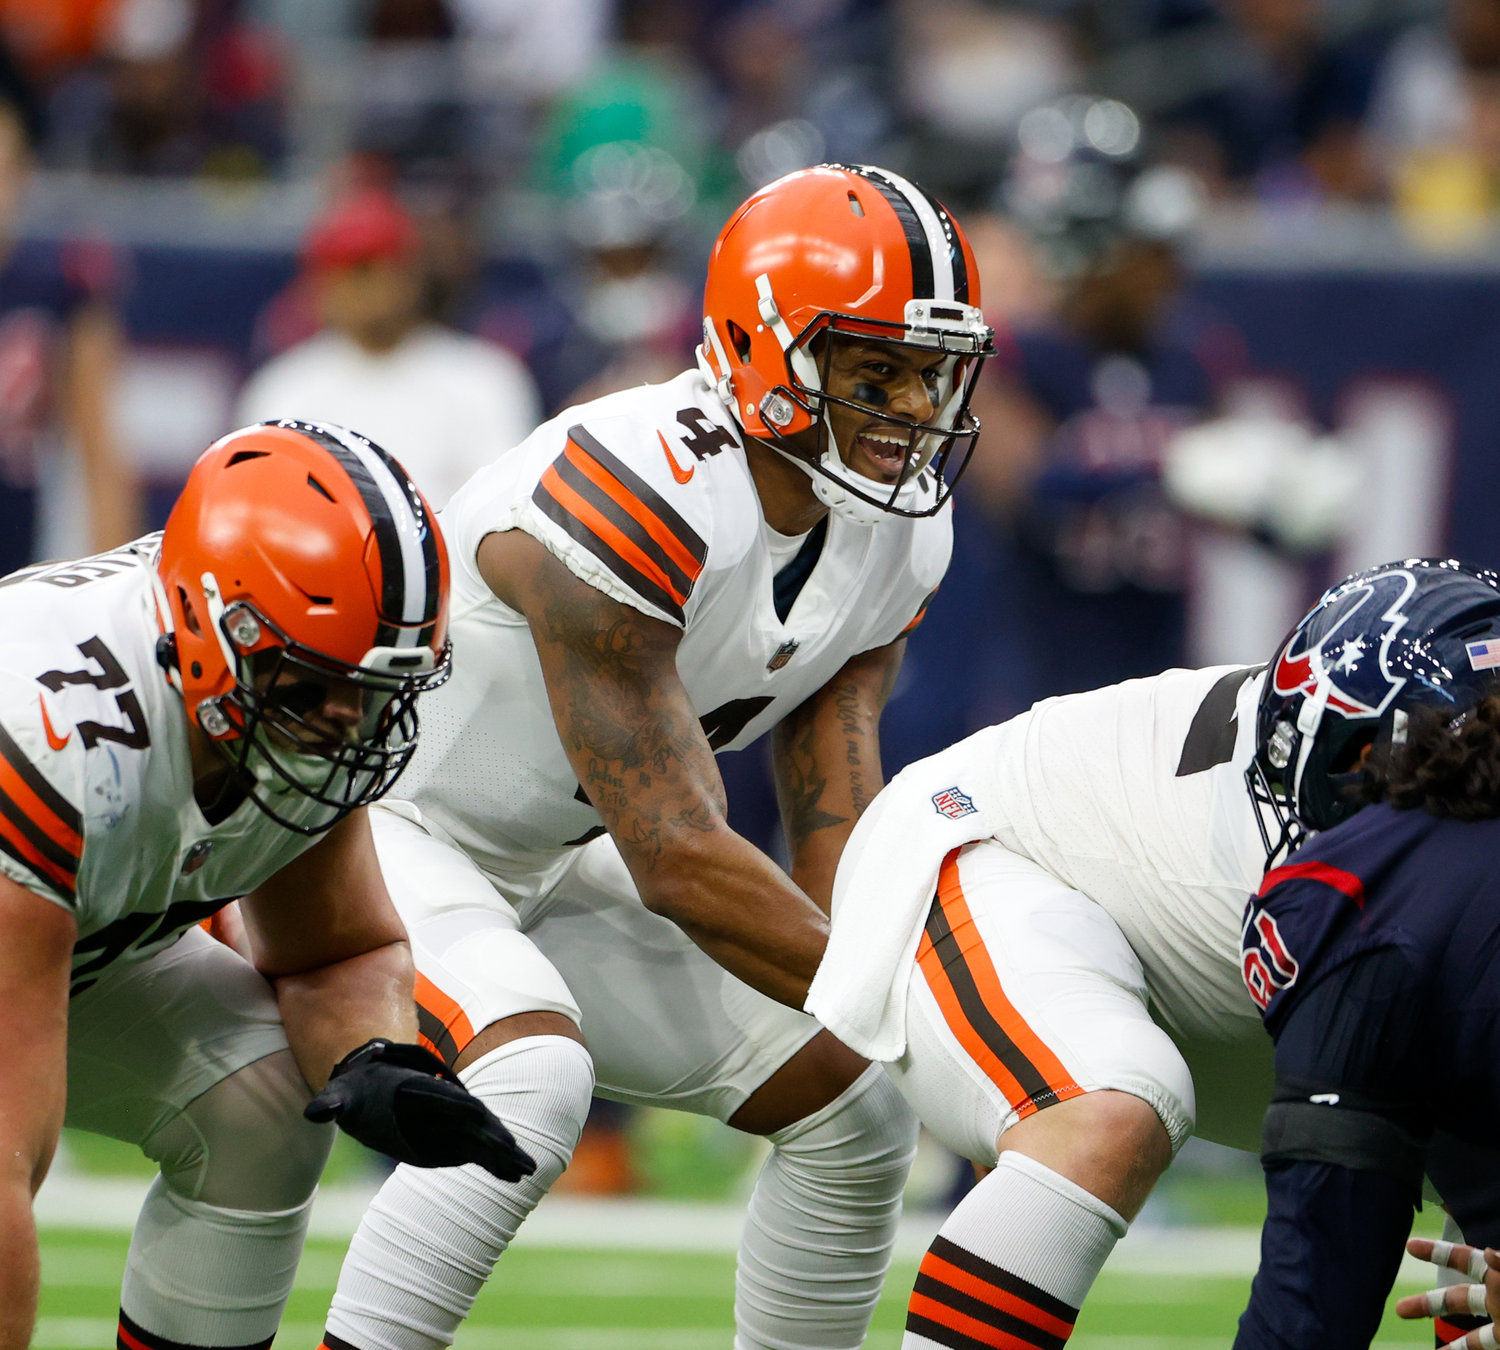 Cleveland Browns quarterback Deshaun Watson (4) prepares for a snap during an NFL game between the Houston Texans and the Cleveland Browns on Dec. 4, 2022, in Houston. The Browns won, 27-14.